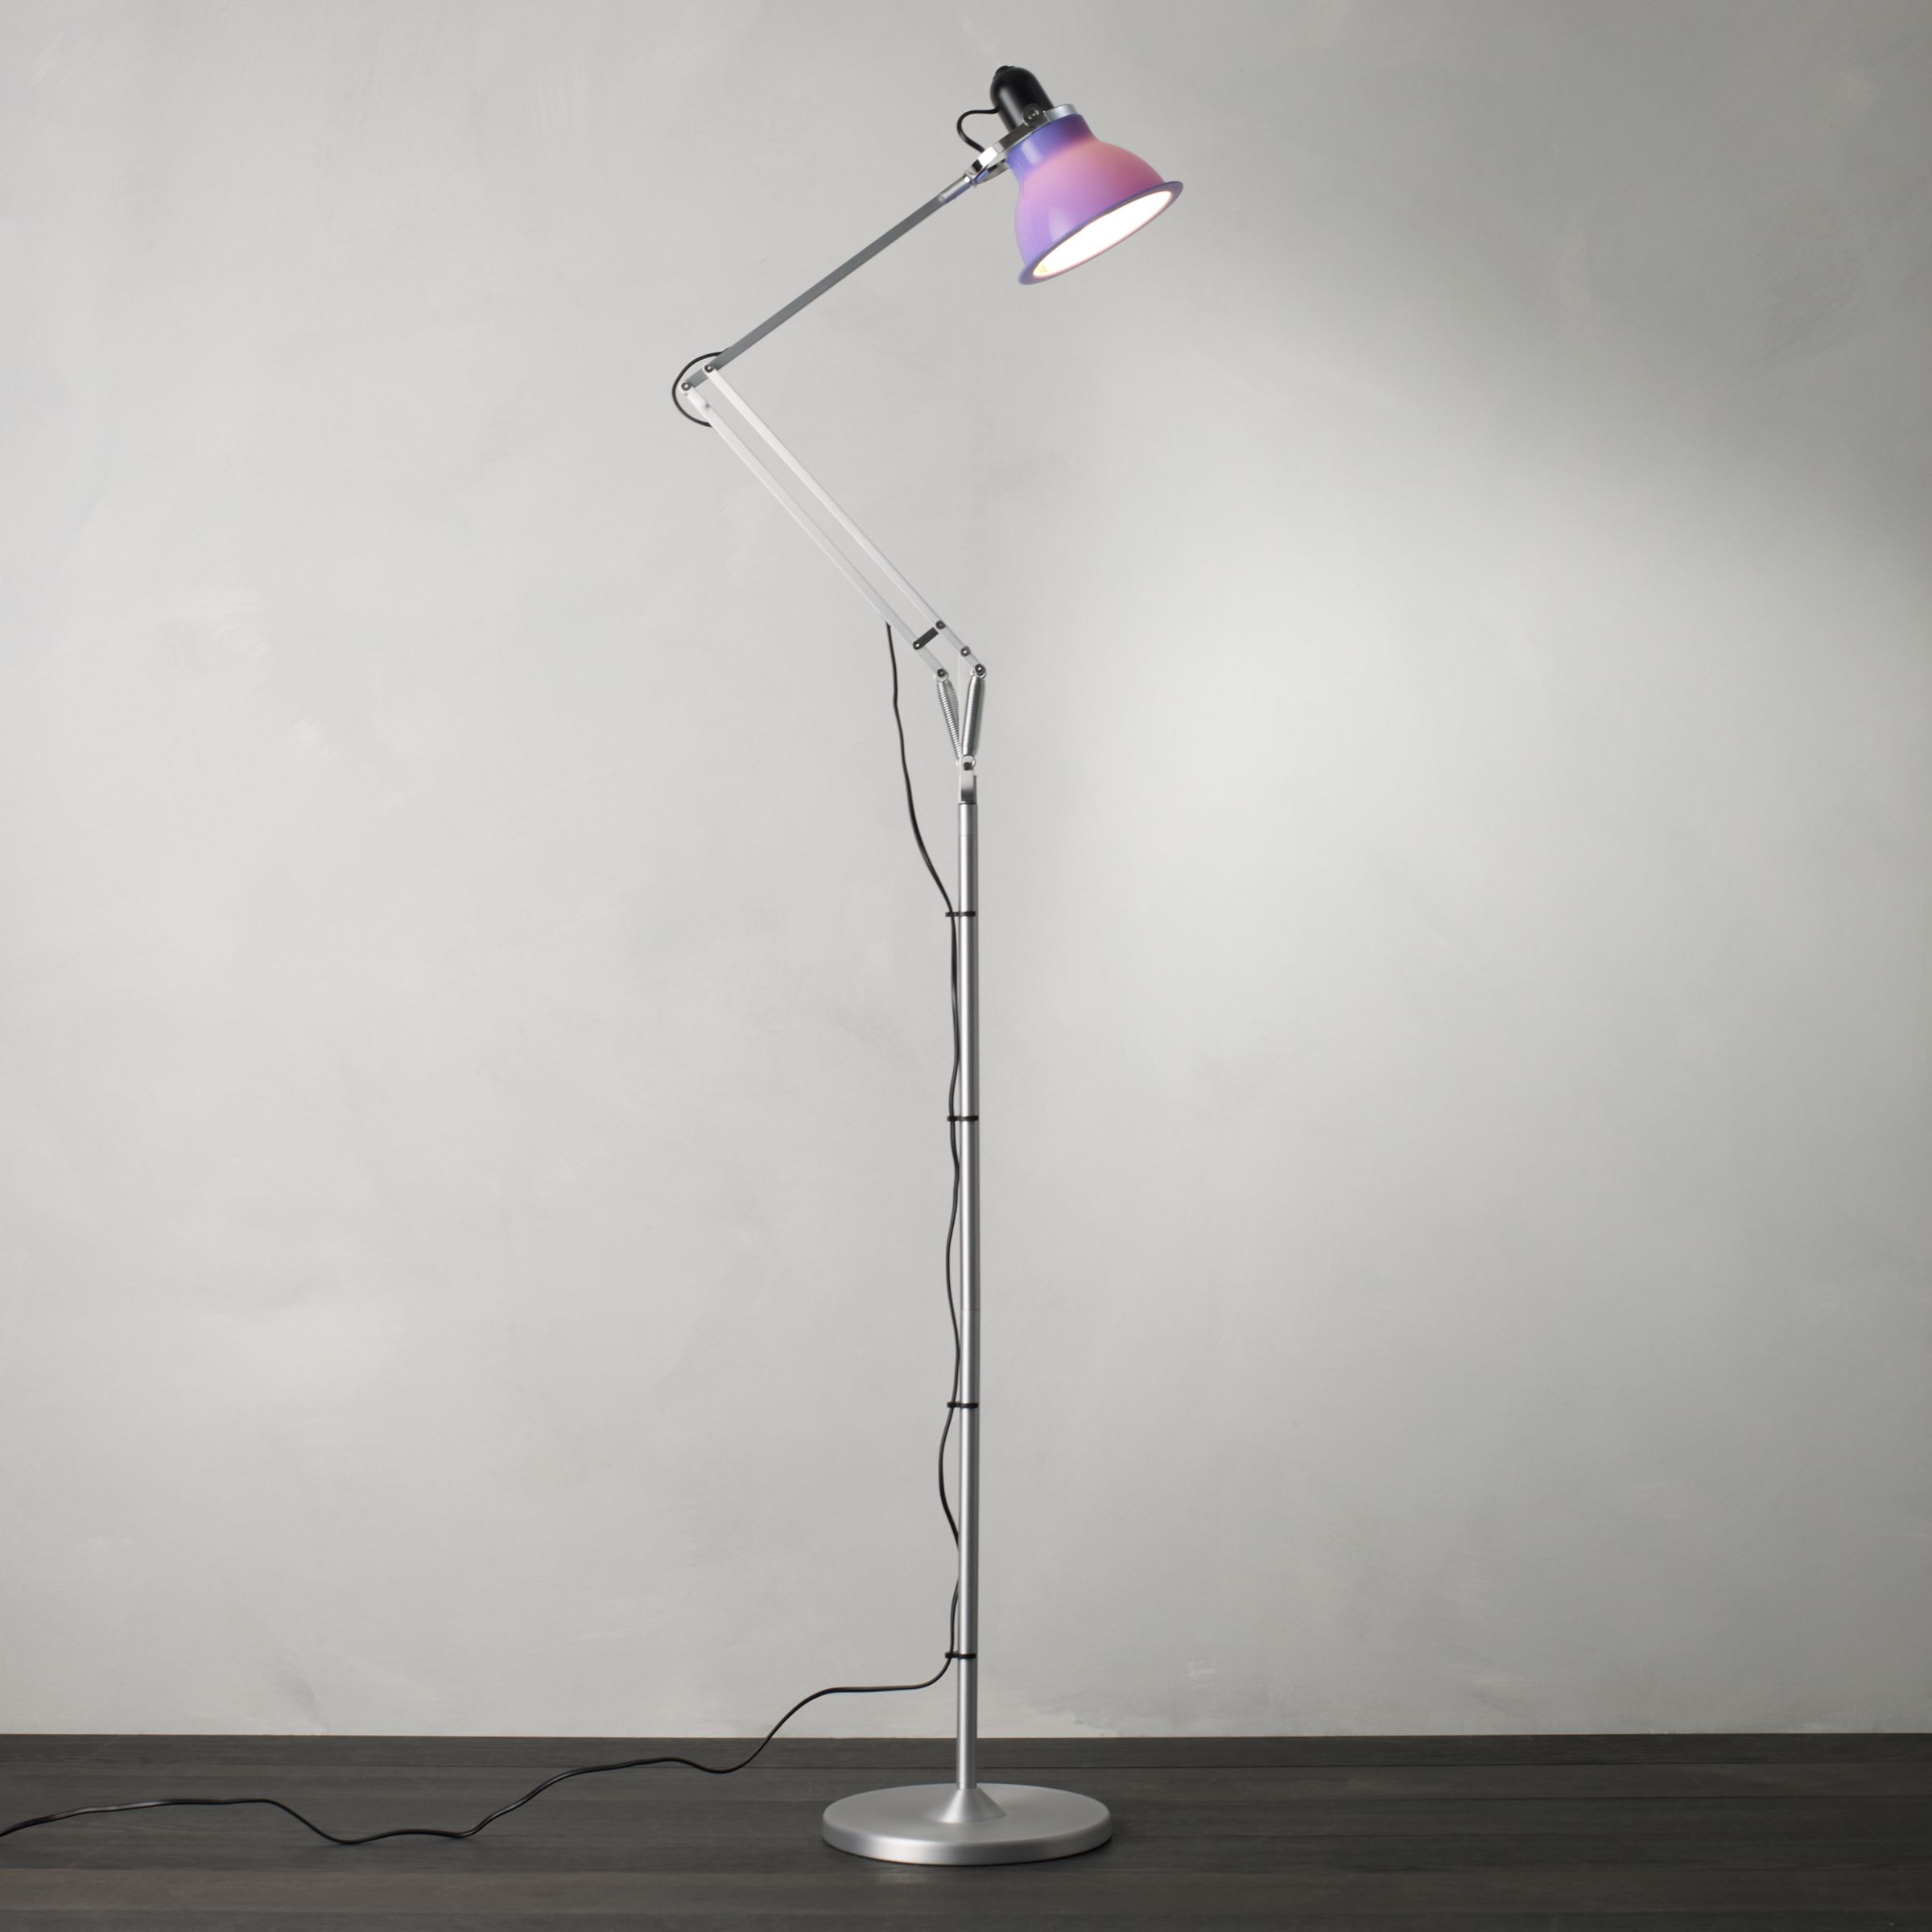 Anglepoise Type 1228 Standing Floor Lamp, Lilac